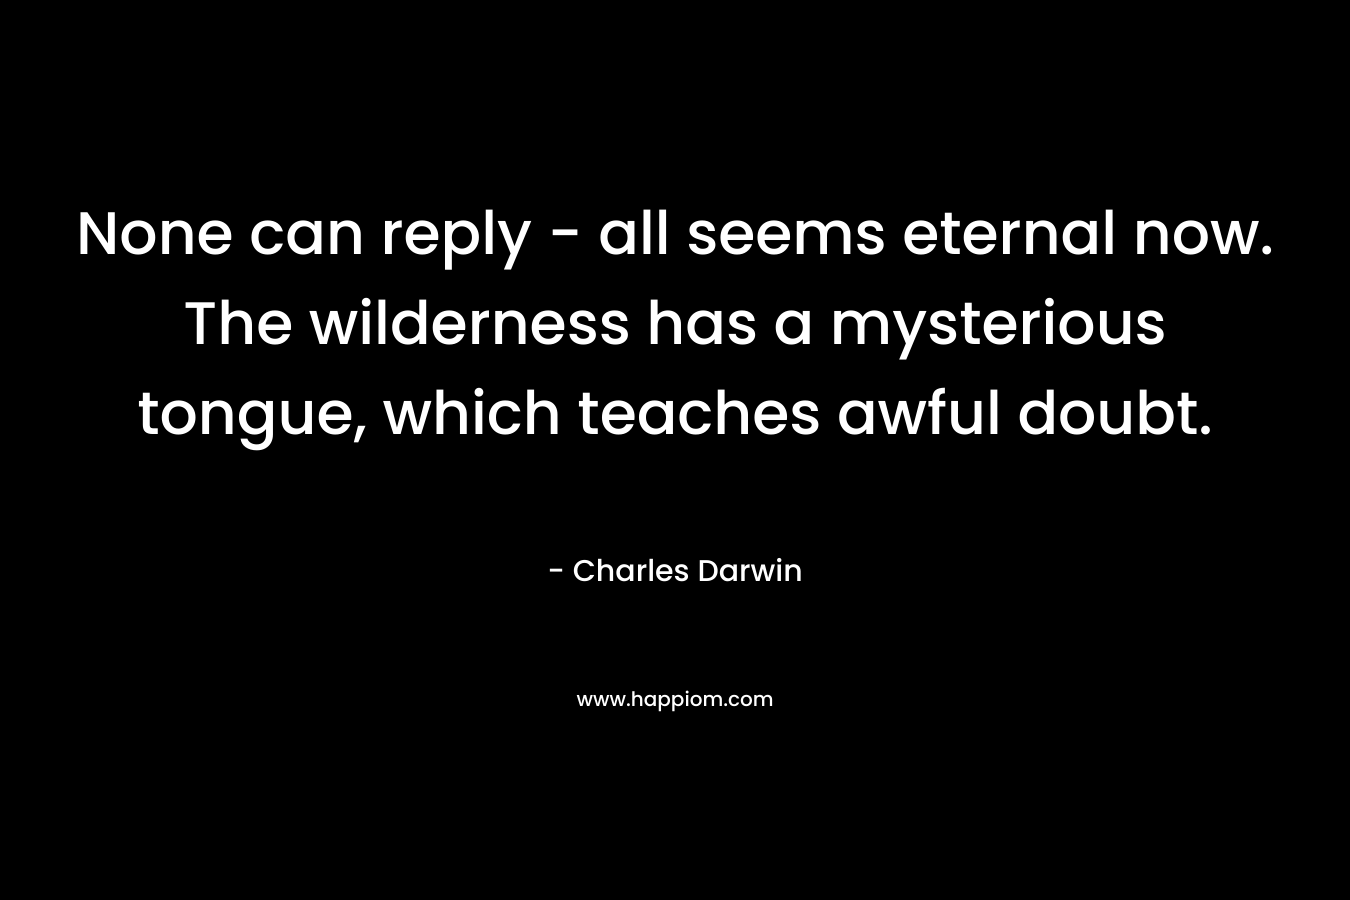 None can reply - all seems eternal now. The wilderness has a mysterious tongue, which teaches awful doubt.